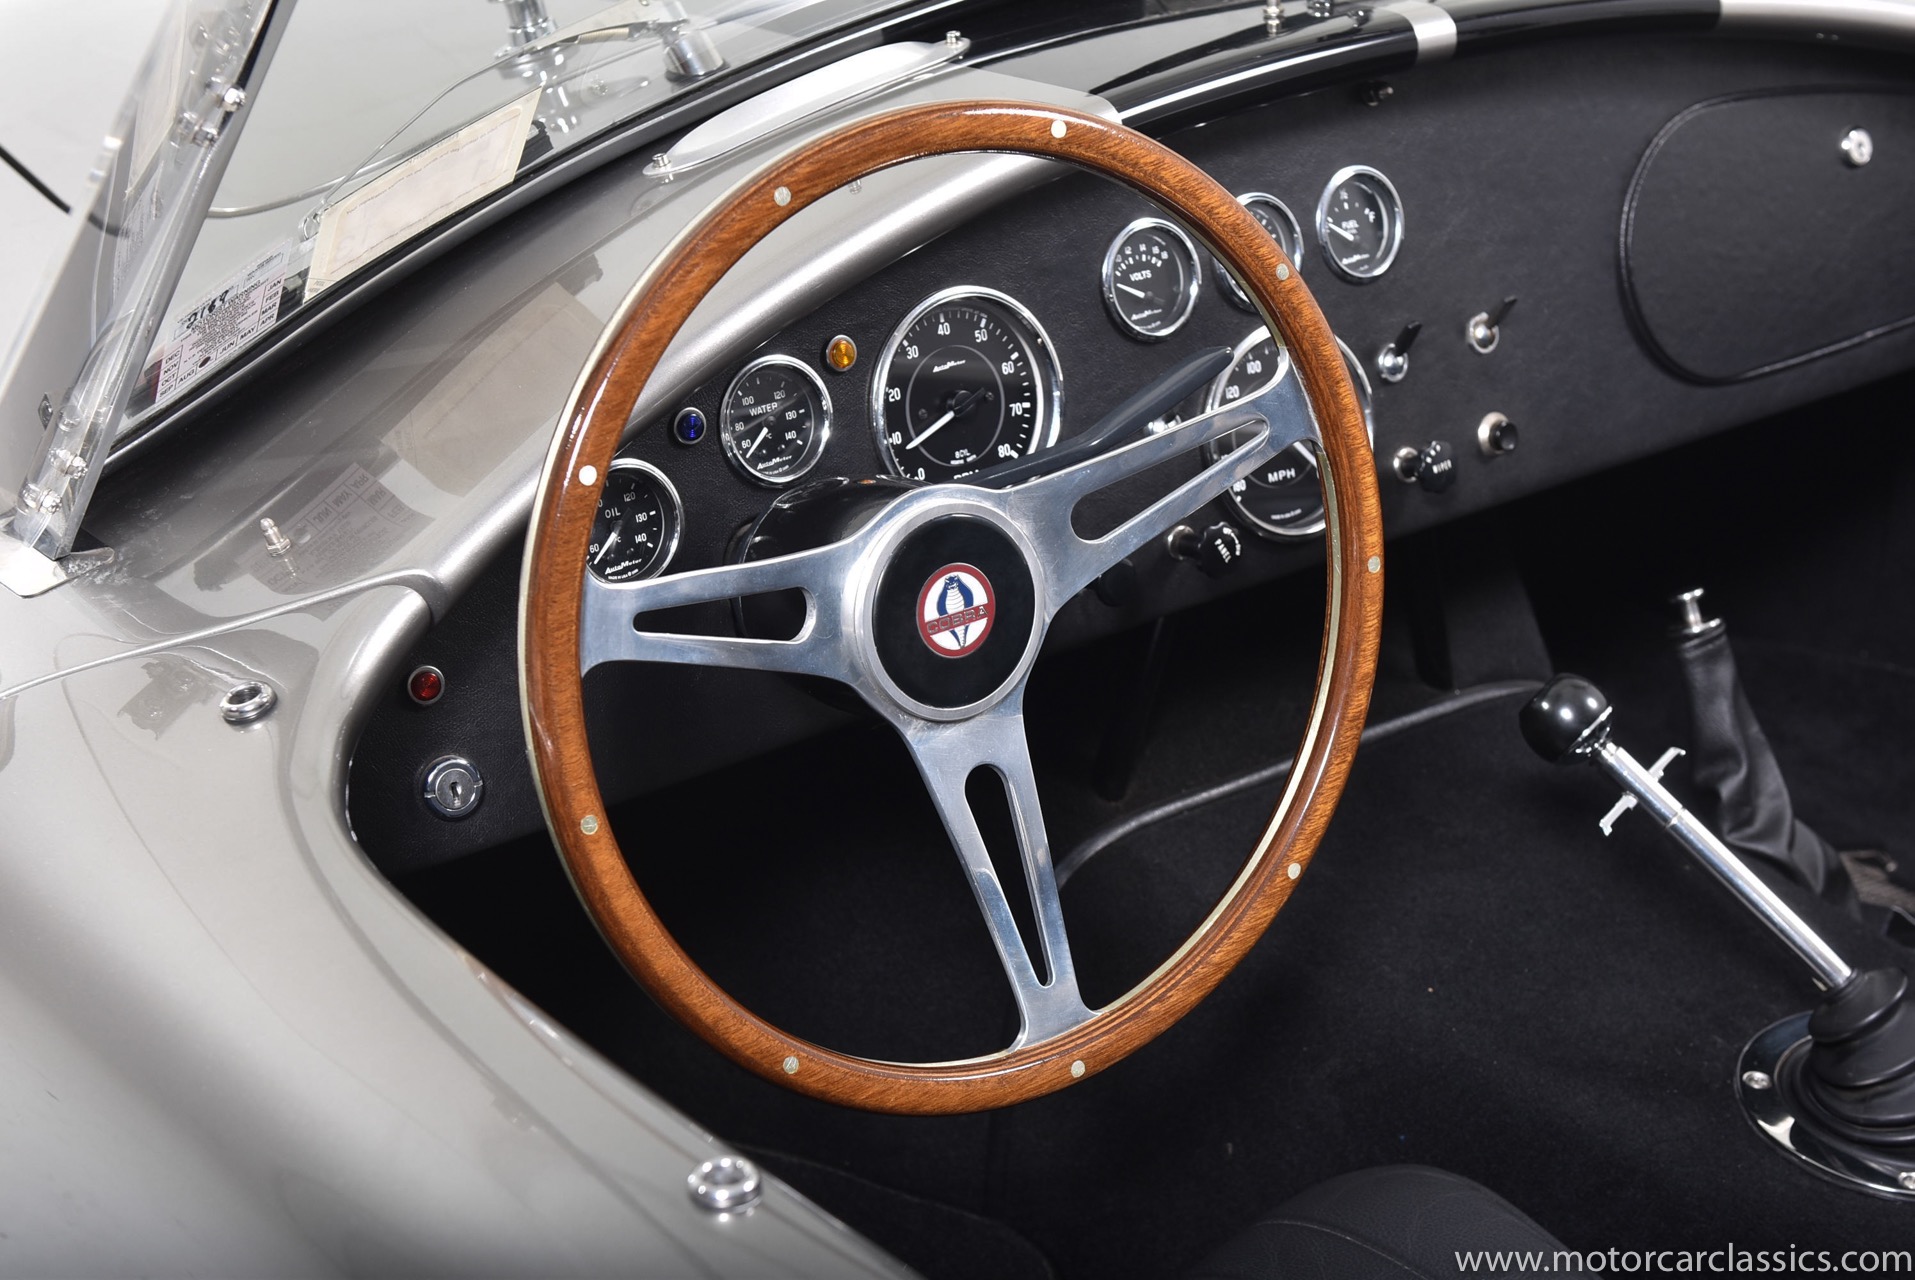 Used 1965 Shelby Cobra 427 For Sale ($74,900) | Motorcar Classics Stock ...